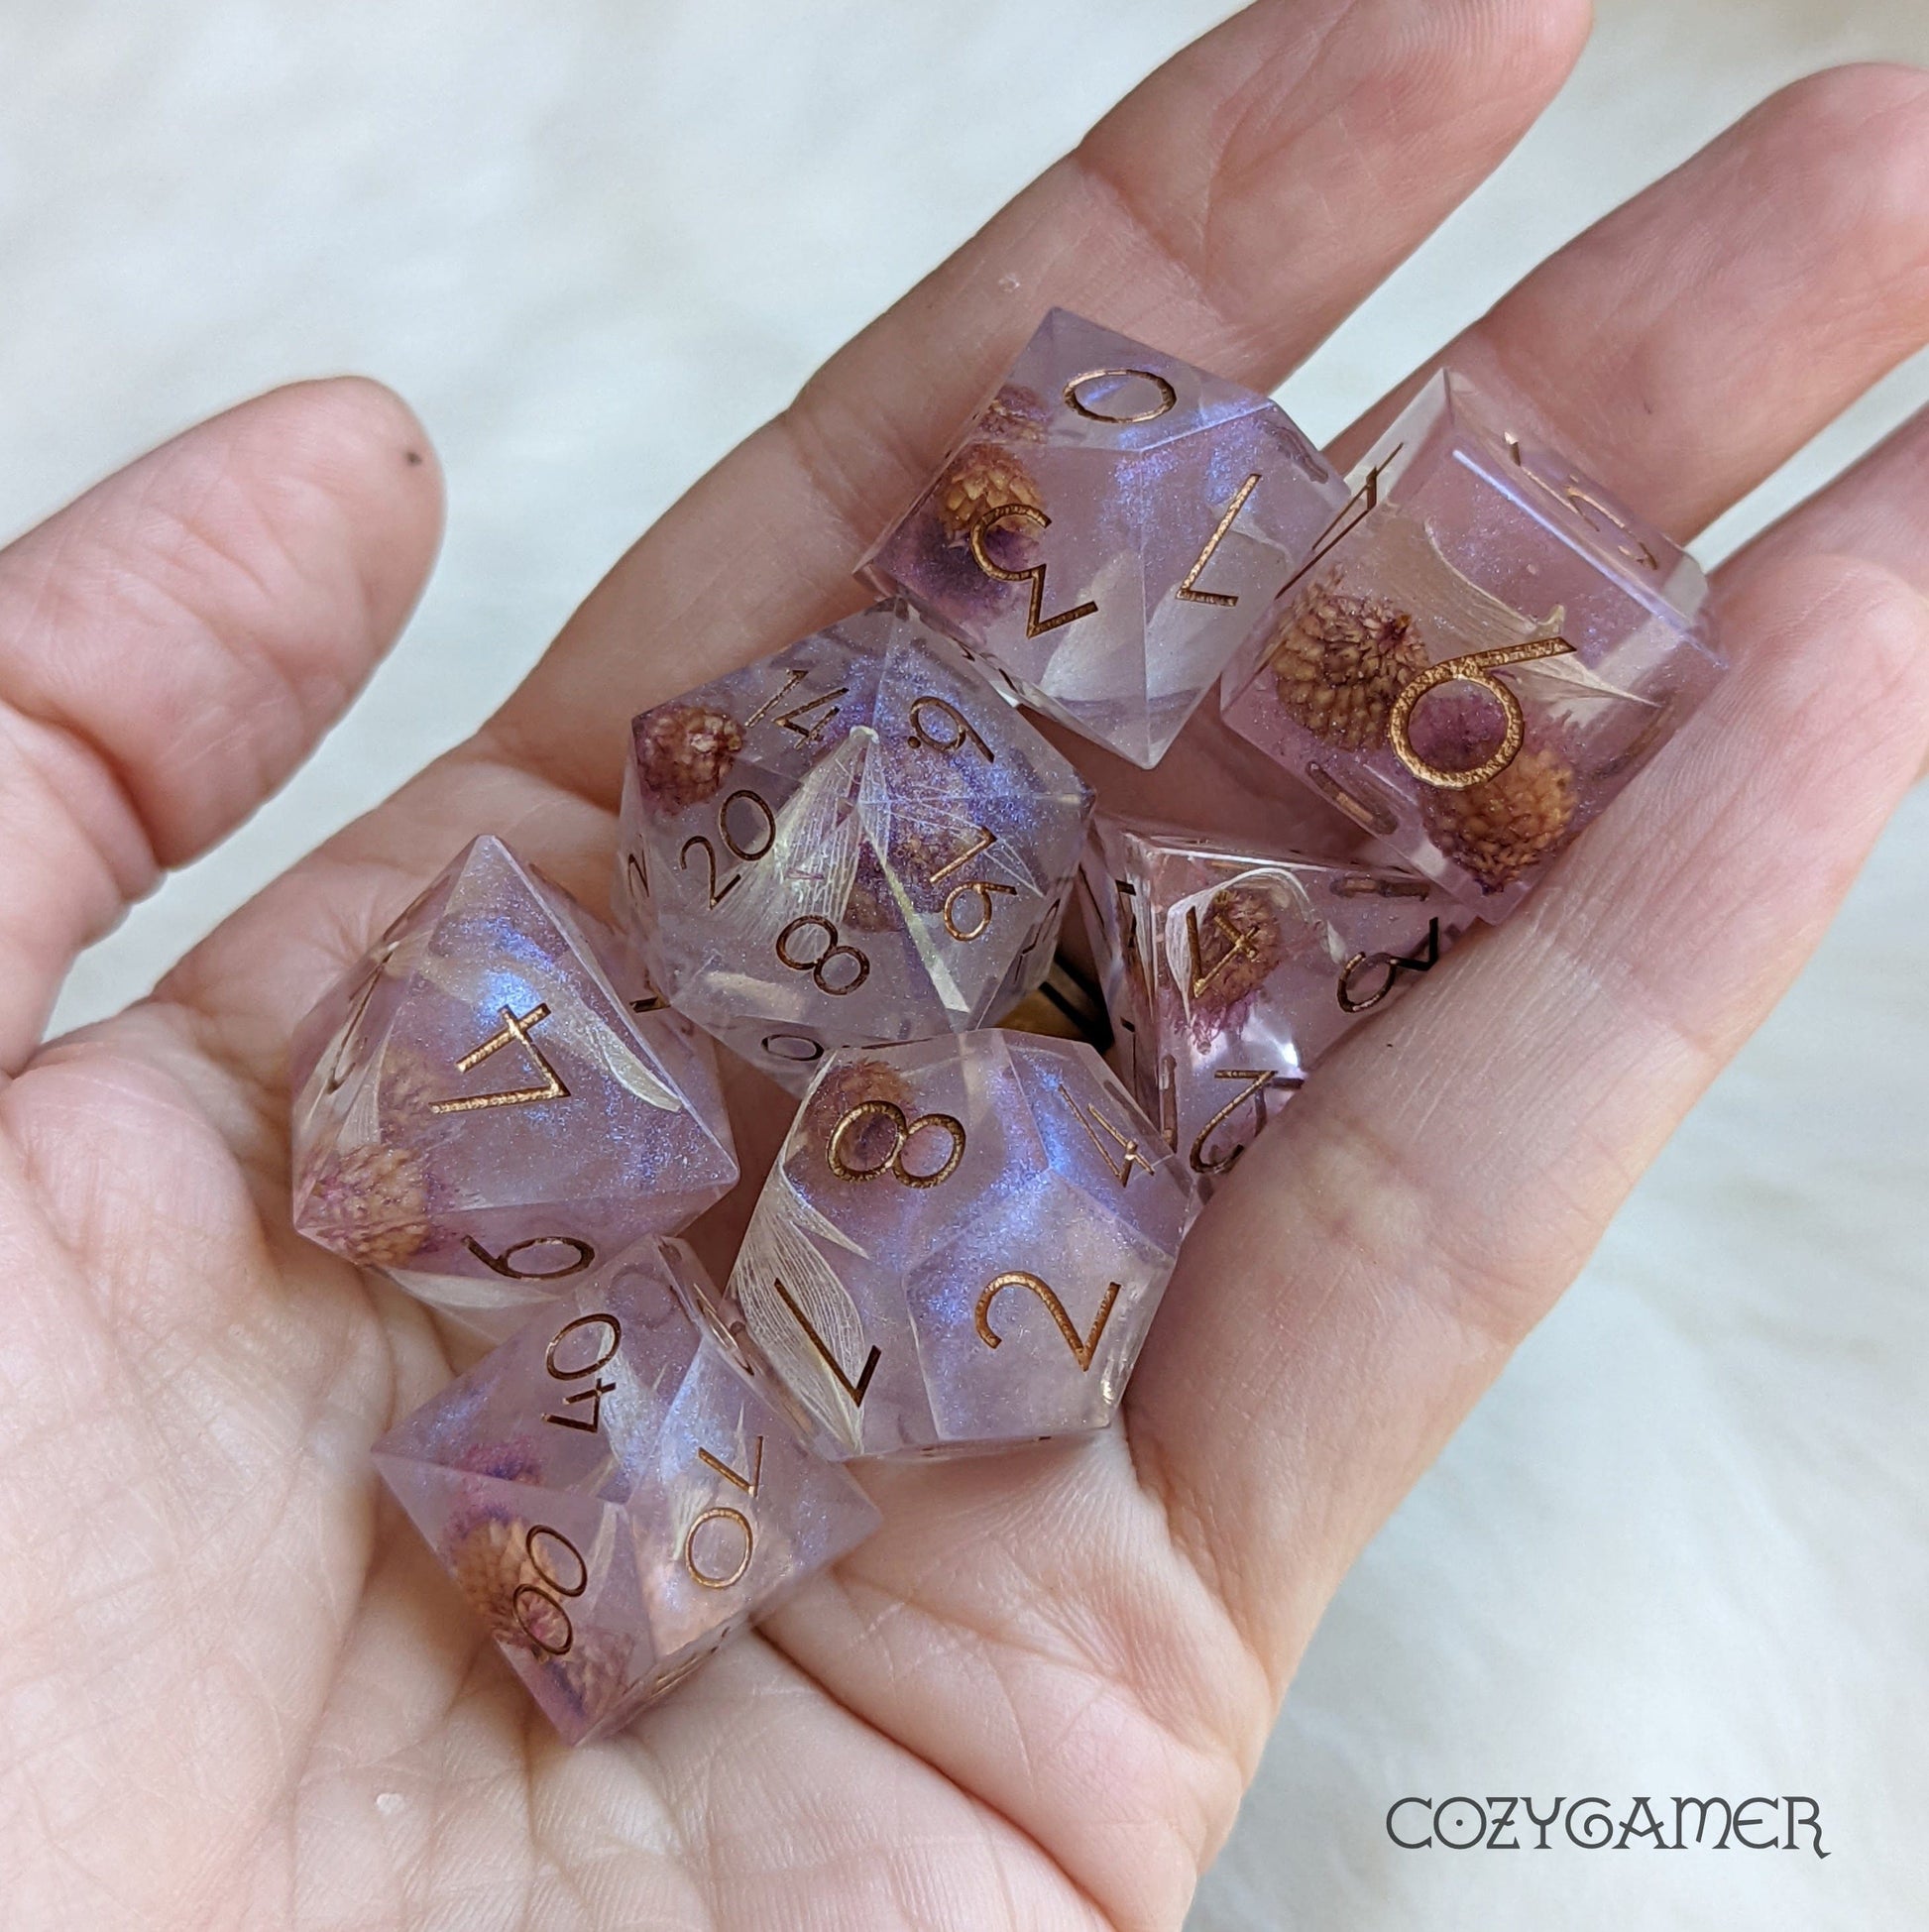 Thistle Handmade Sharp Edge Resin Dice Set. 7 Piece DND dice set with real dried flowers inside